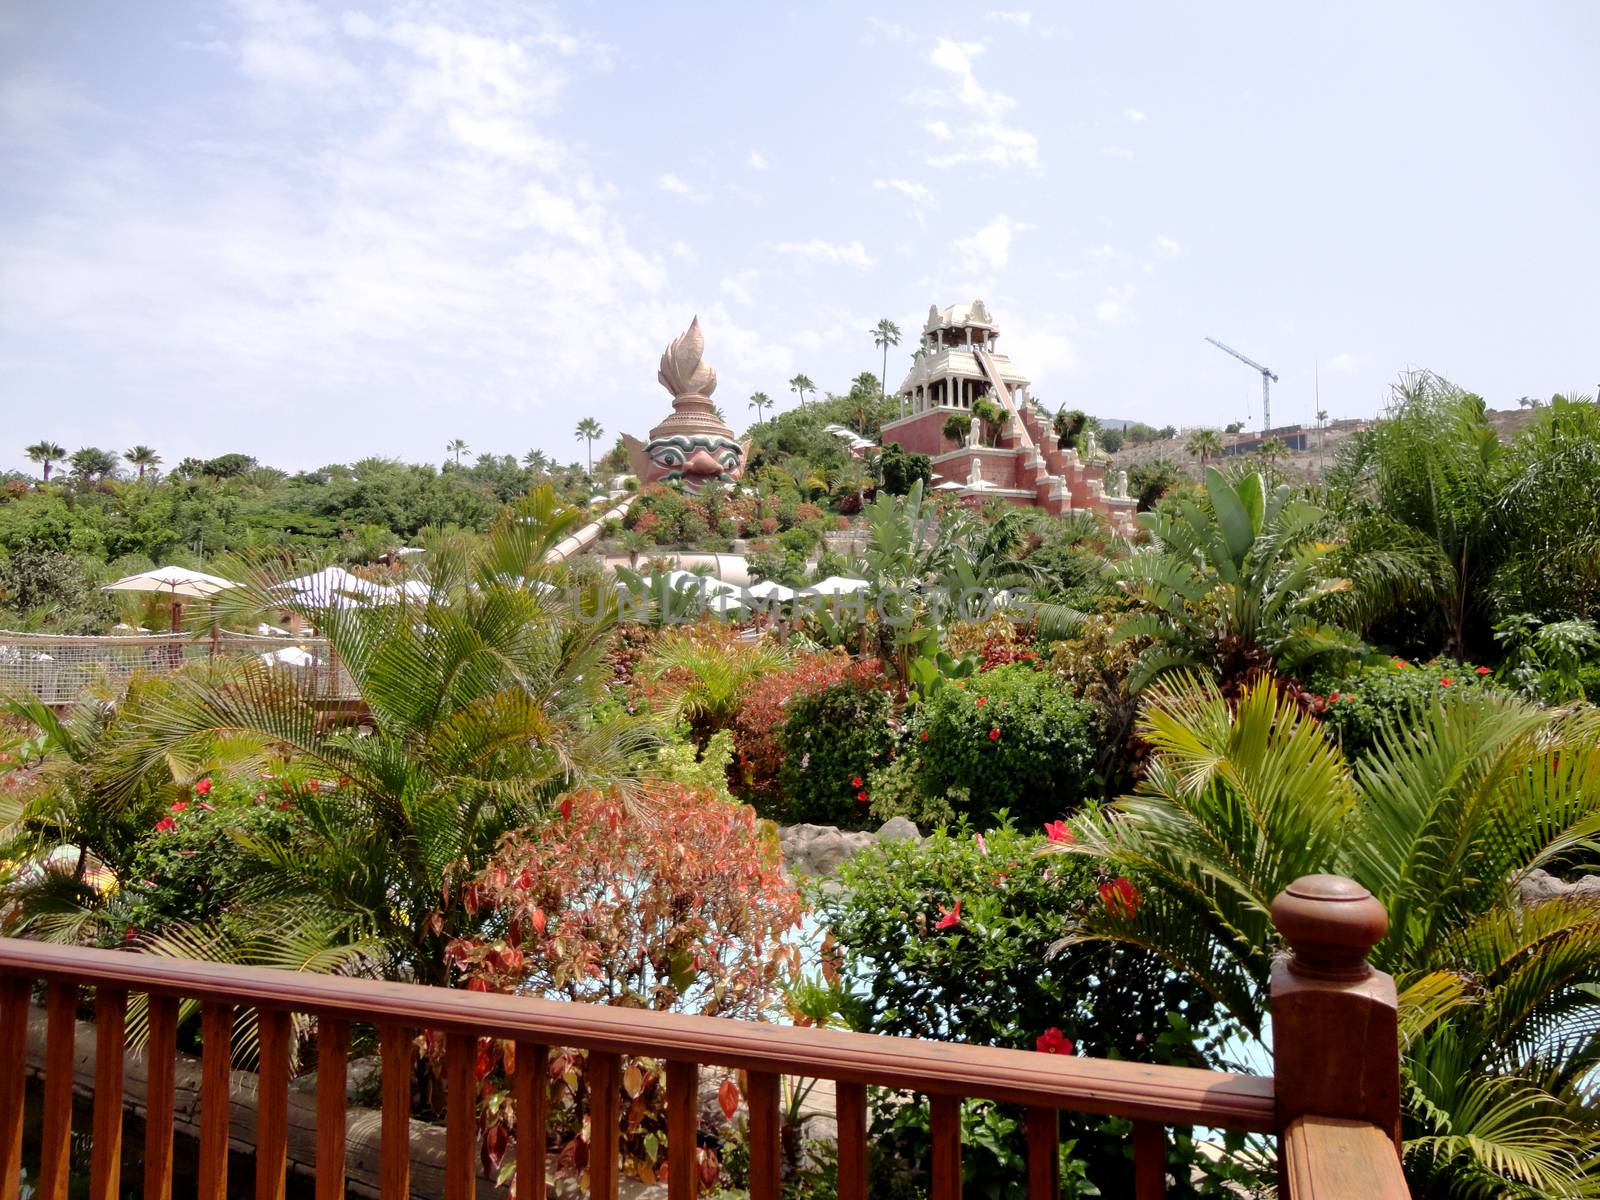 View of Siam Park's steep slide taken from the park's entrance, Tenerife, Spain.

Picture taken on July 28, 2011.